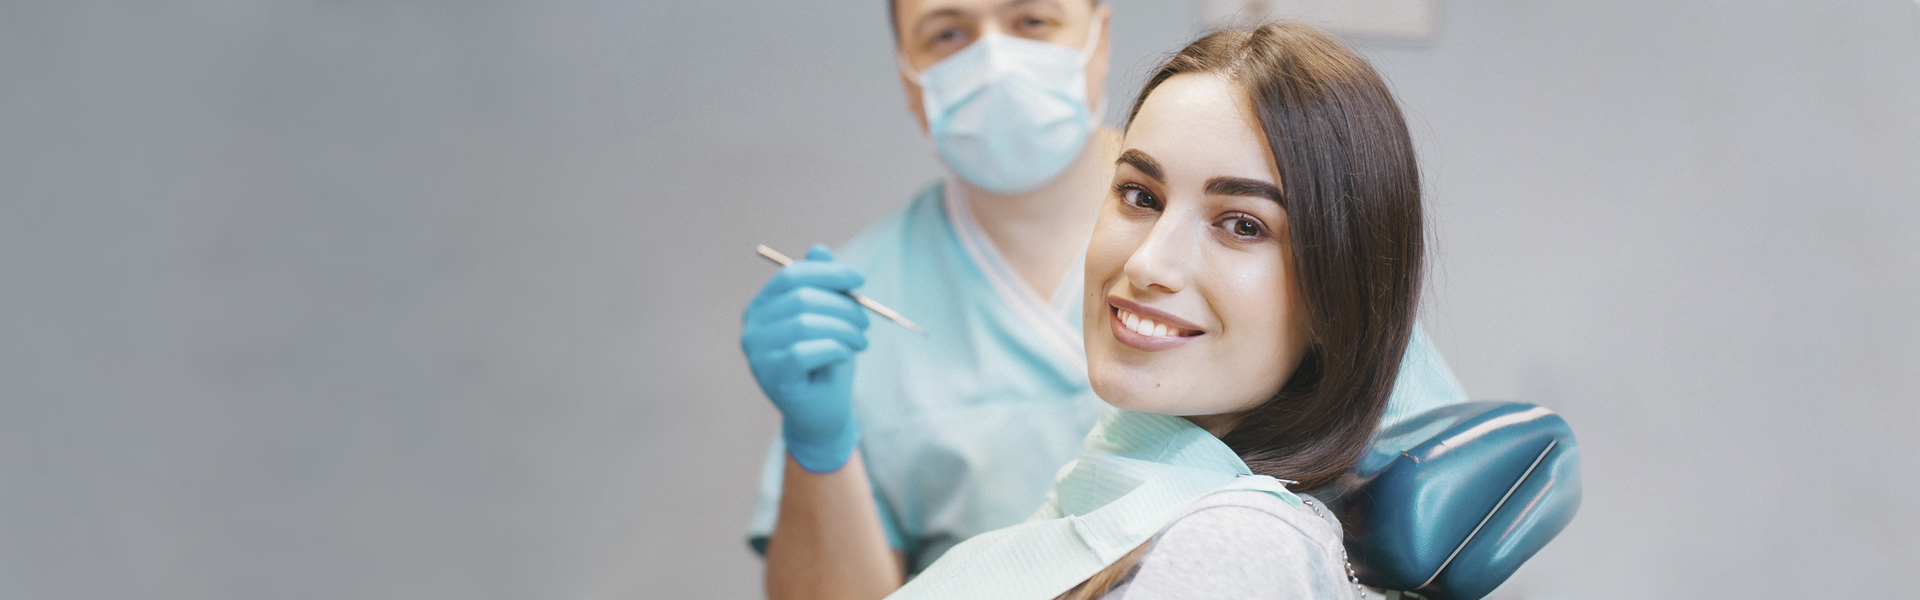 Five Restorative Dental Options to Fix Your Smile